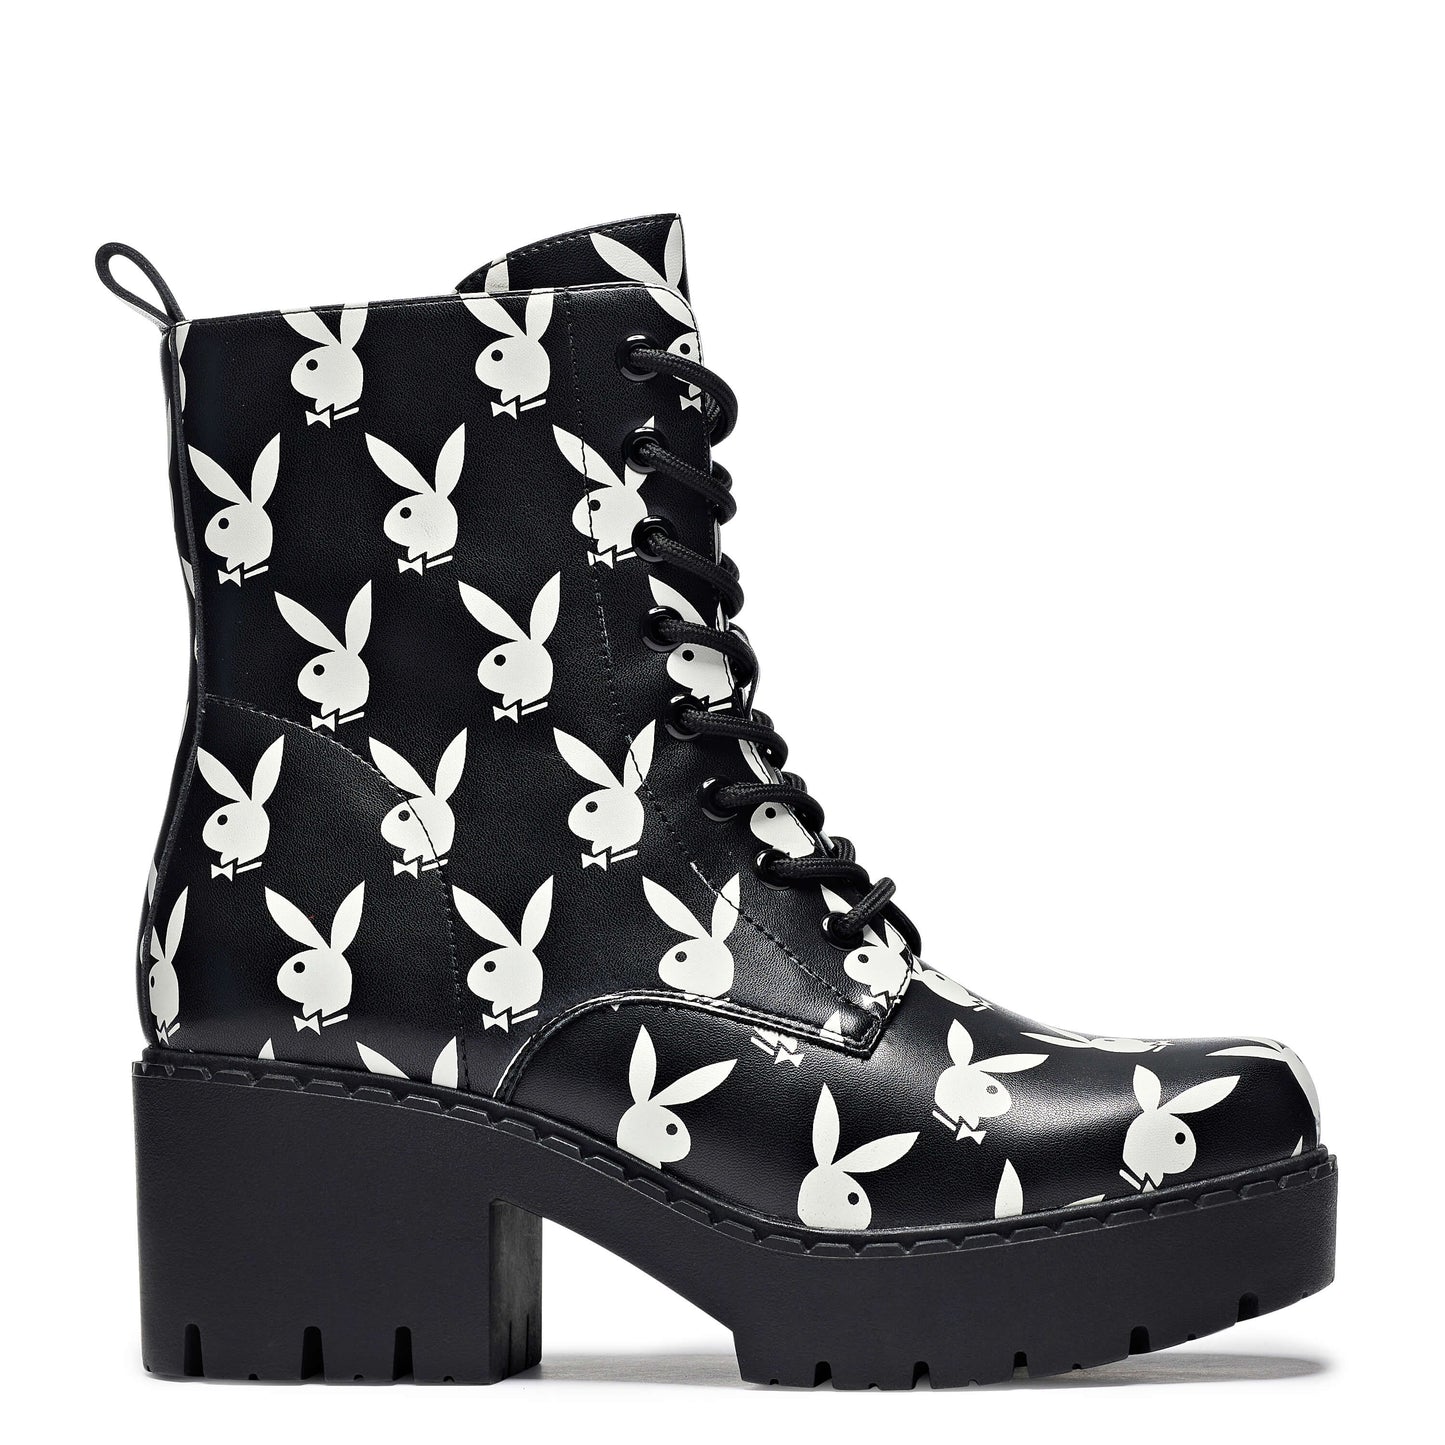 Playboy Reprise White Switch Boots - Ankle Boots - KOI Footwear - Black - Side View